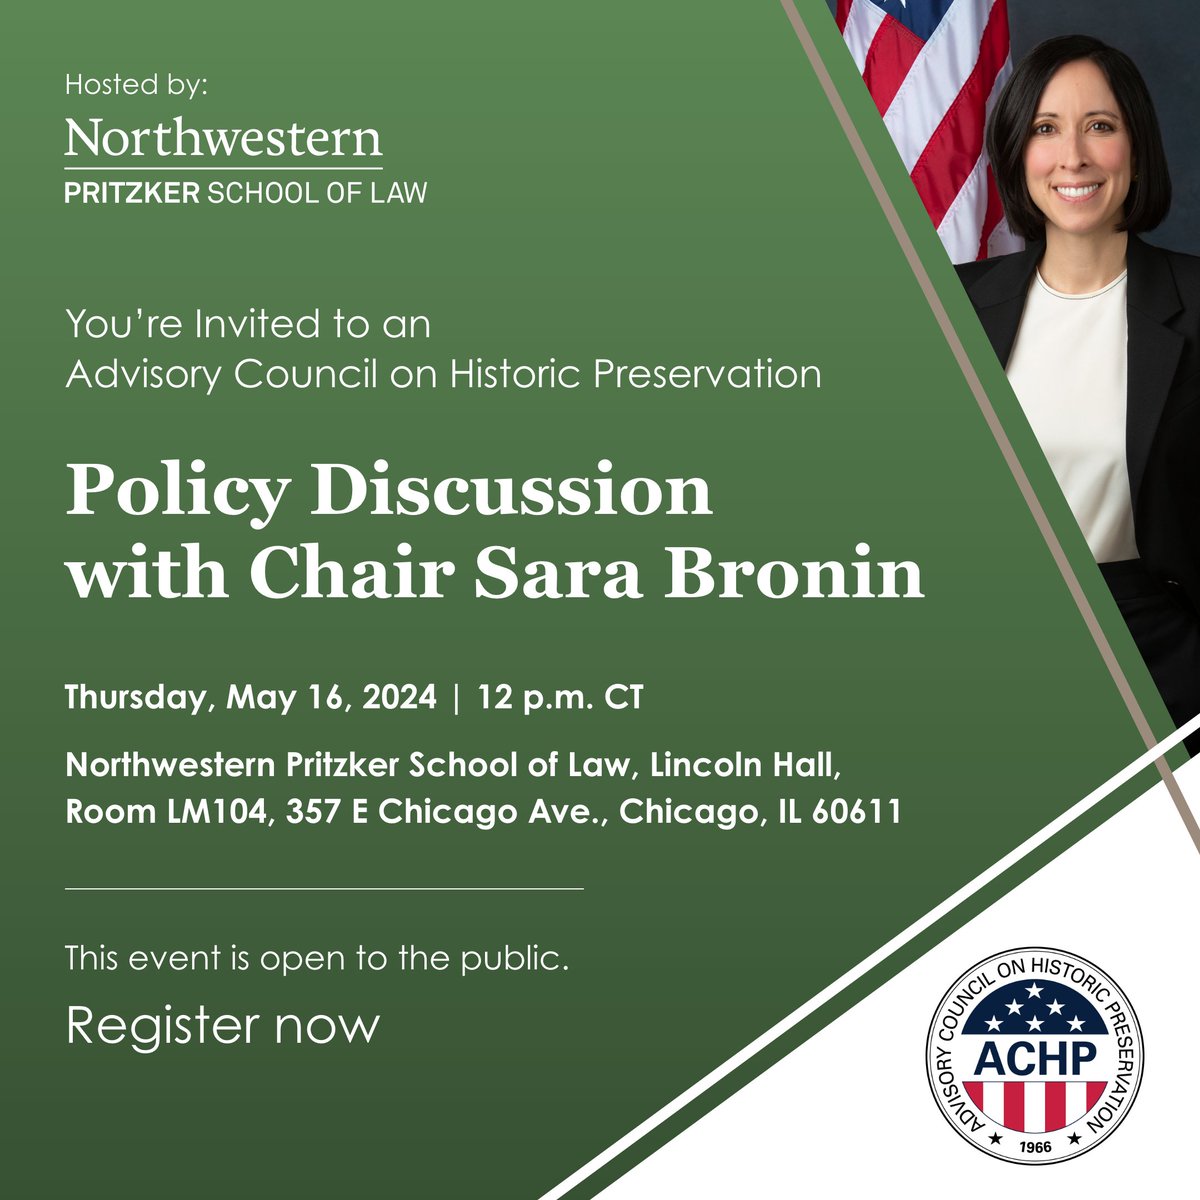 Join ACHP @ChairBronin 12 p.m. CT Thurs. 5/16 @NorthwesternLaw for a discussion of federal preservation law and policy, including new ACHP initiatives on housing and climate change, and specific government actions involving Chicago's historic resources. forms.office.com/g/JN19NAJEX8